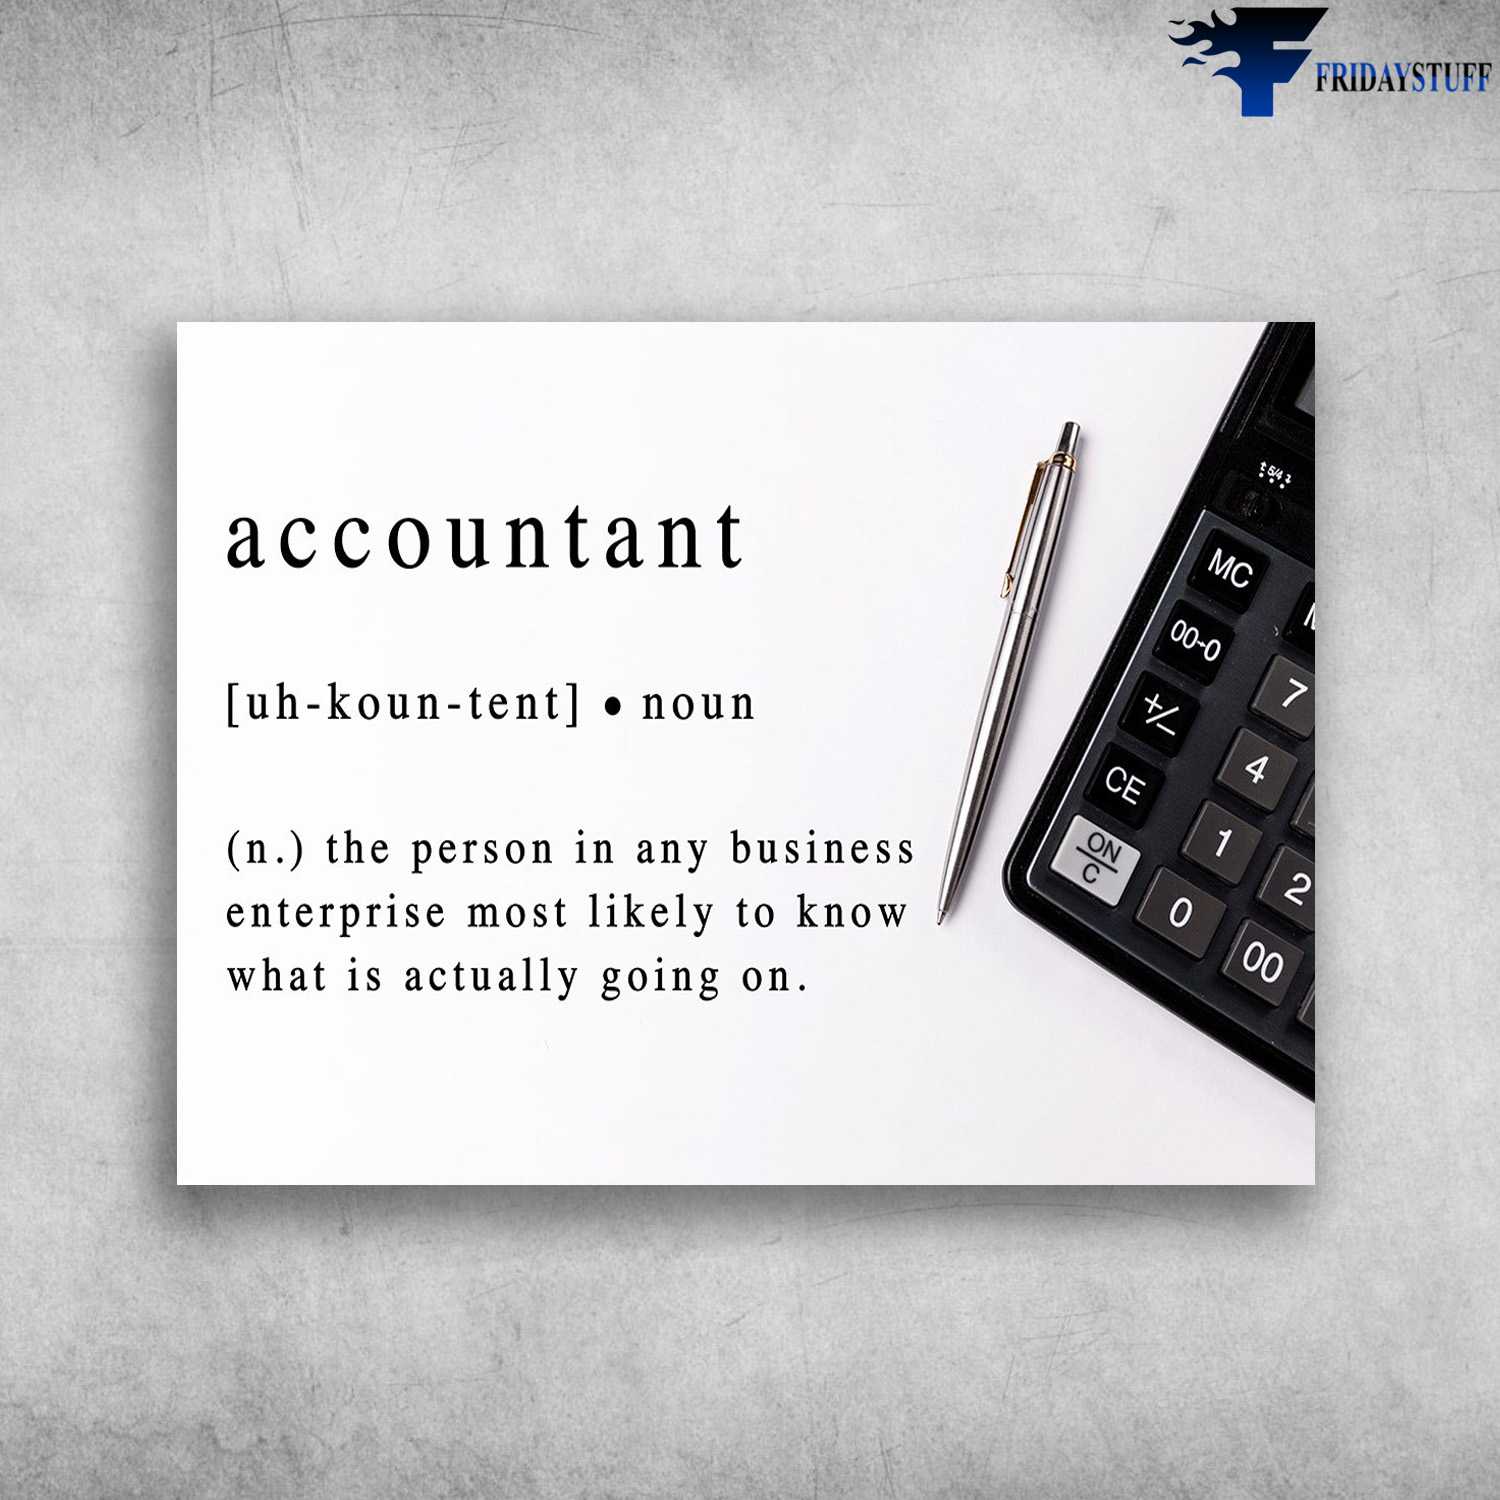 Accountant Poster, Accountain Definition - The Person In Any Business Enterprise Most Likely To Know, What Is Actually Going On